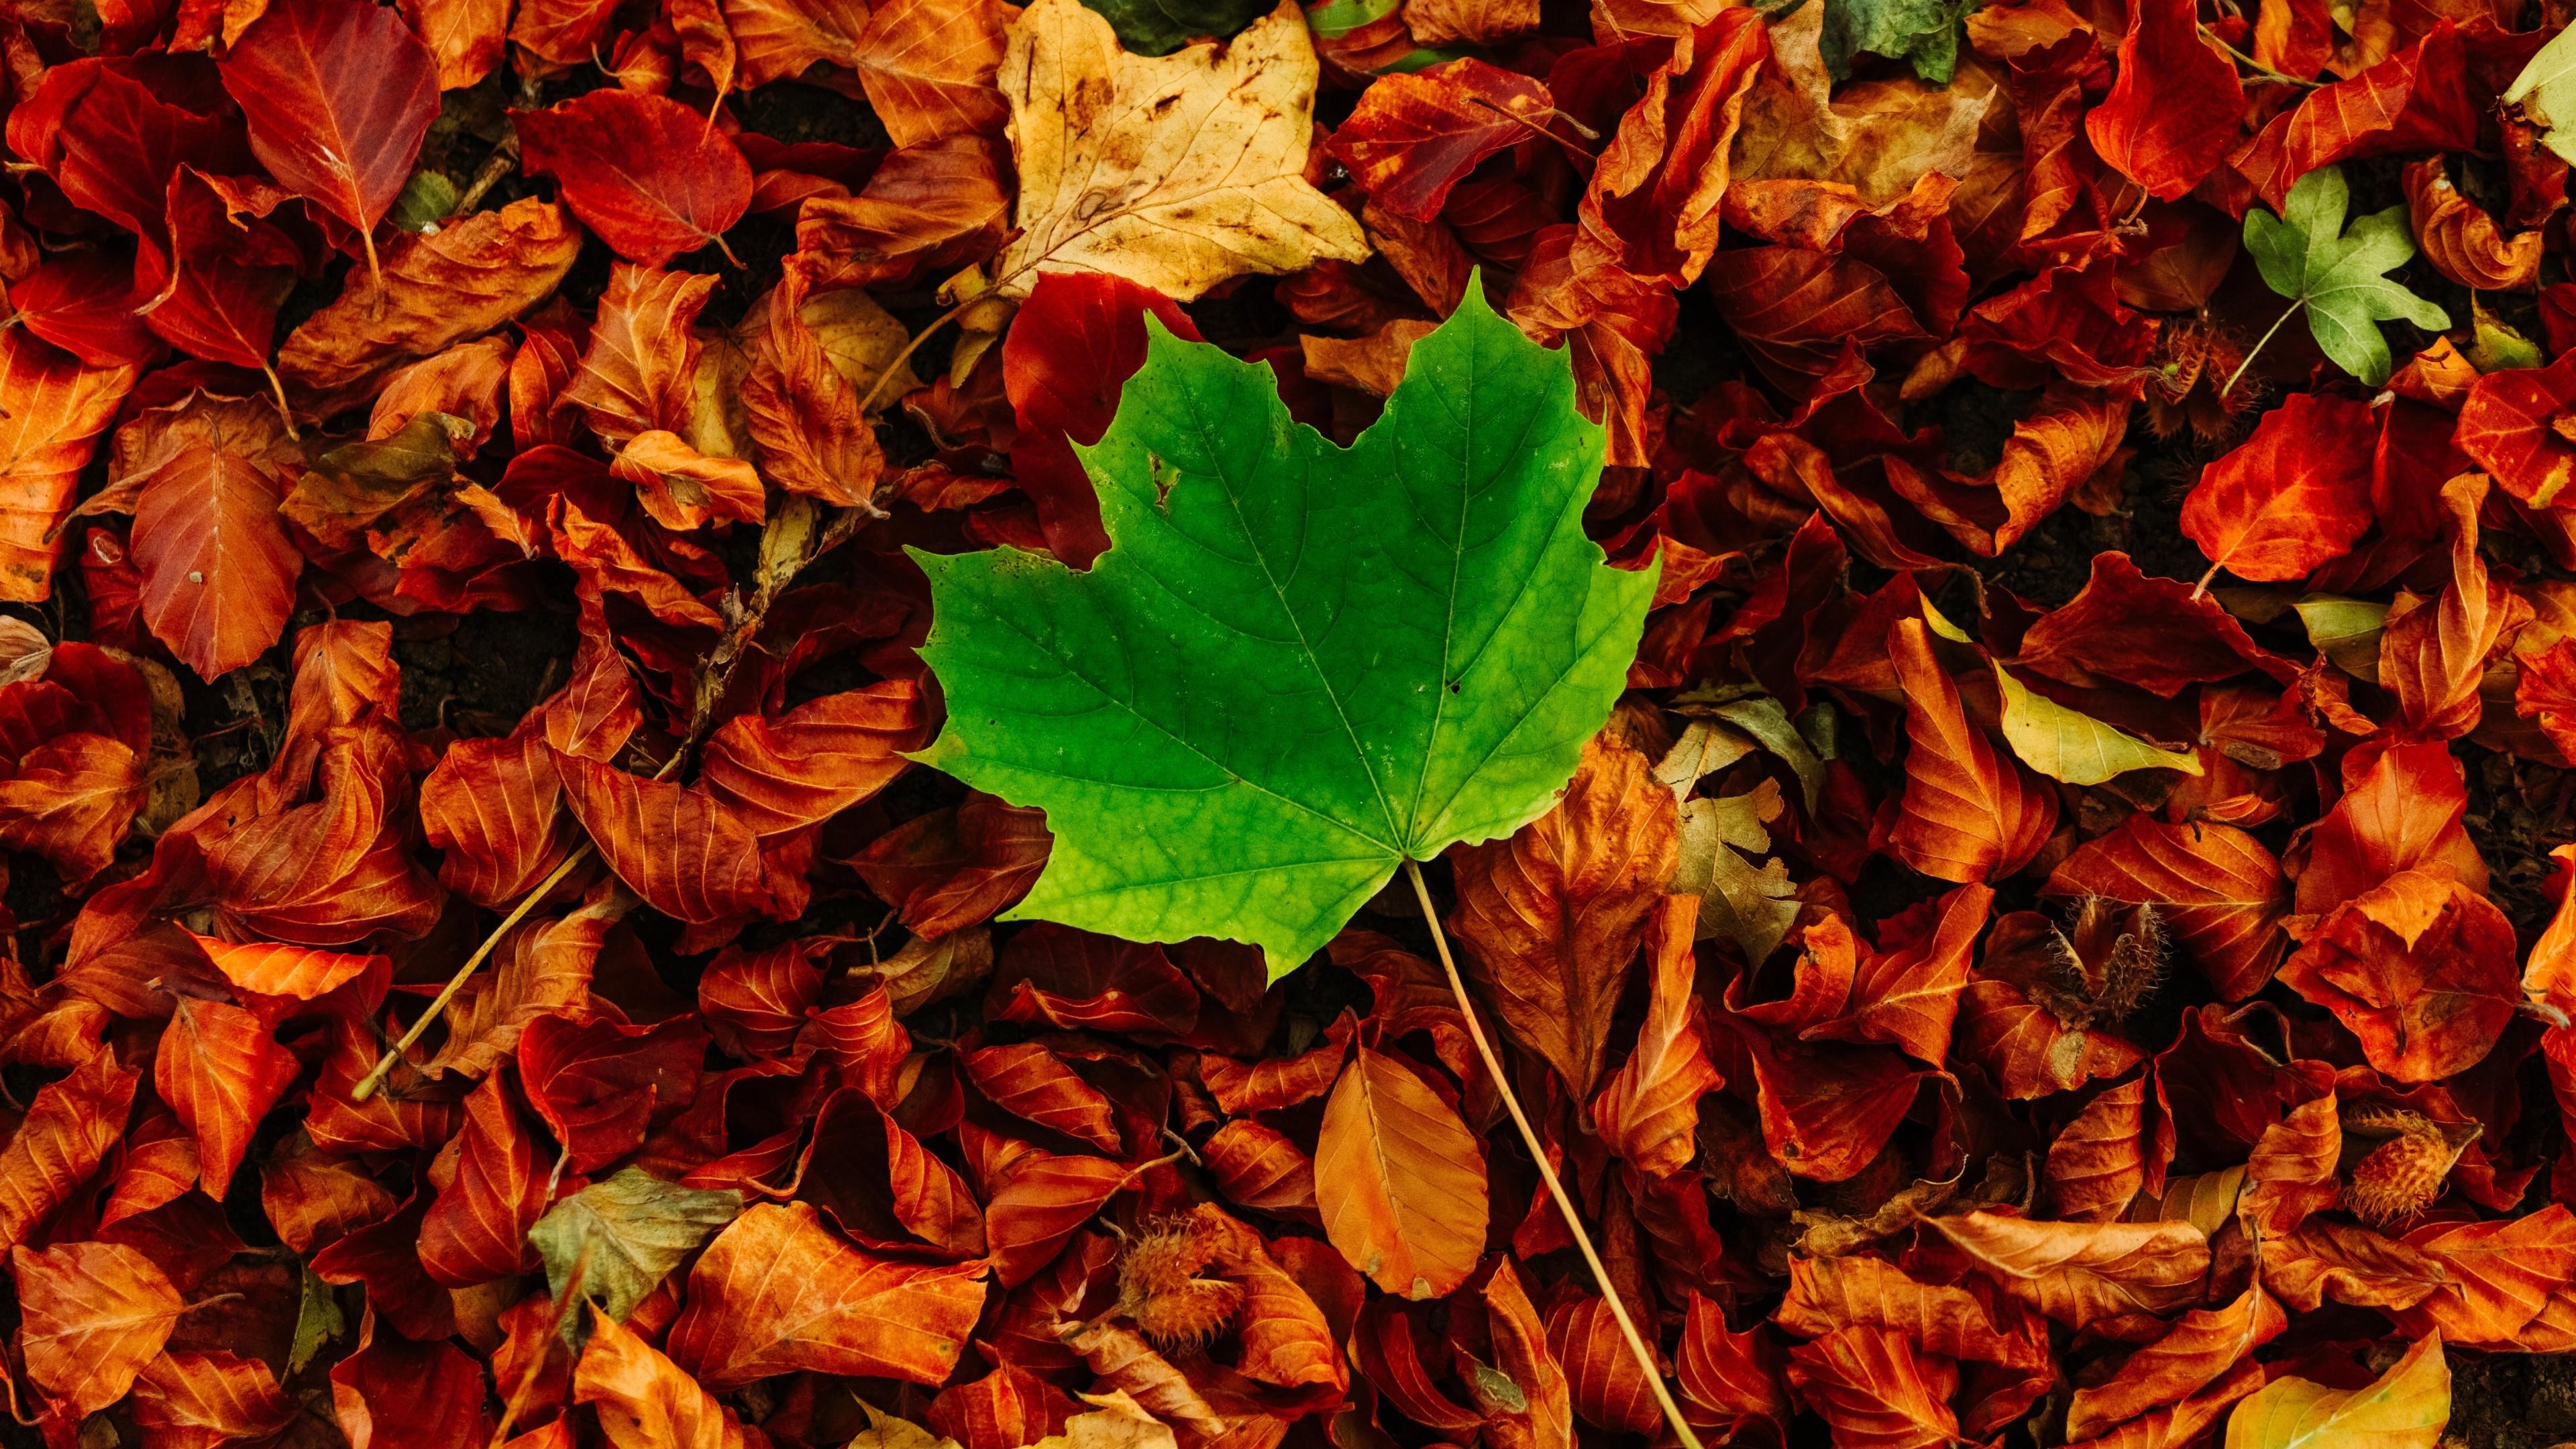 Download 3840x2160 Leaf, Autumn, Fall Wallpaper for UHD TV